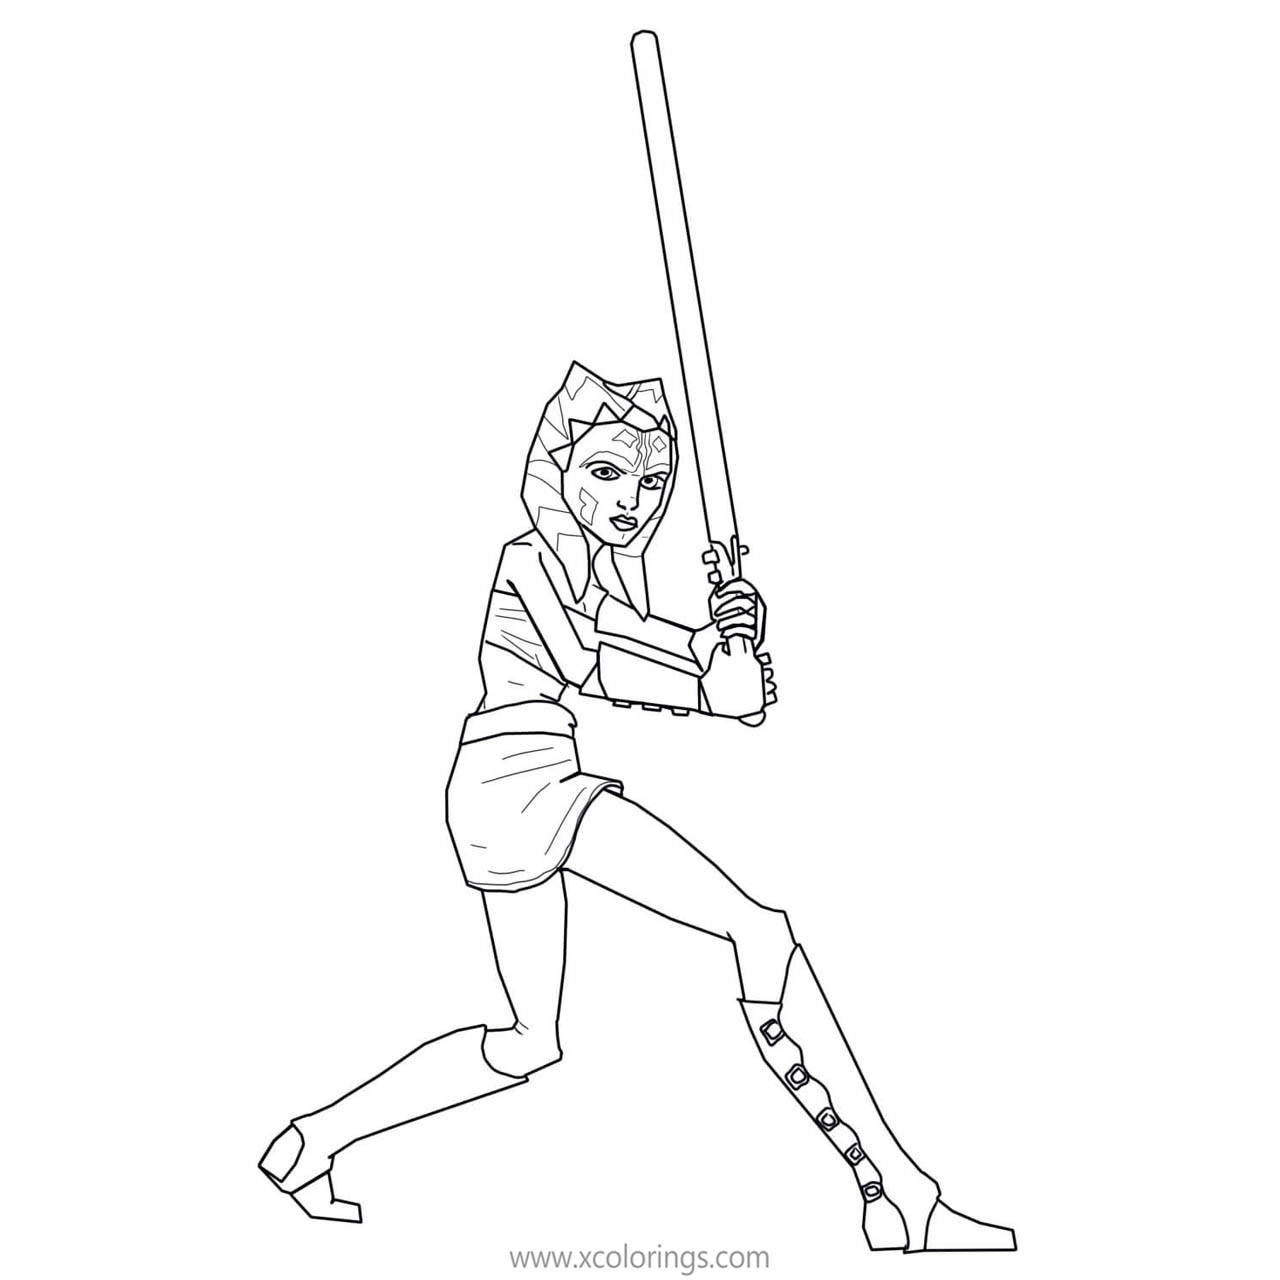 Free Ahsoka Tano Coloring Pages with Lightsaber printable